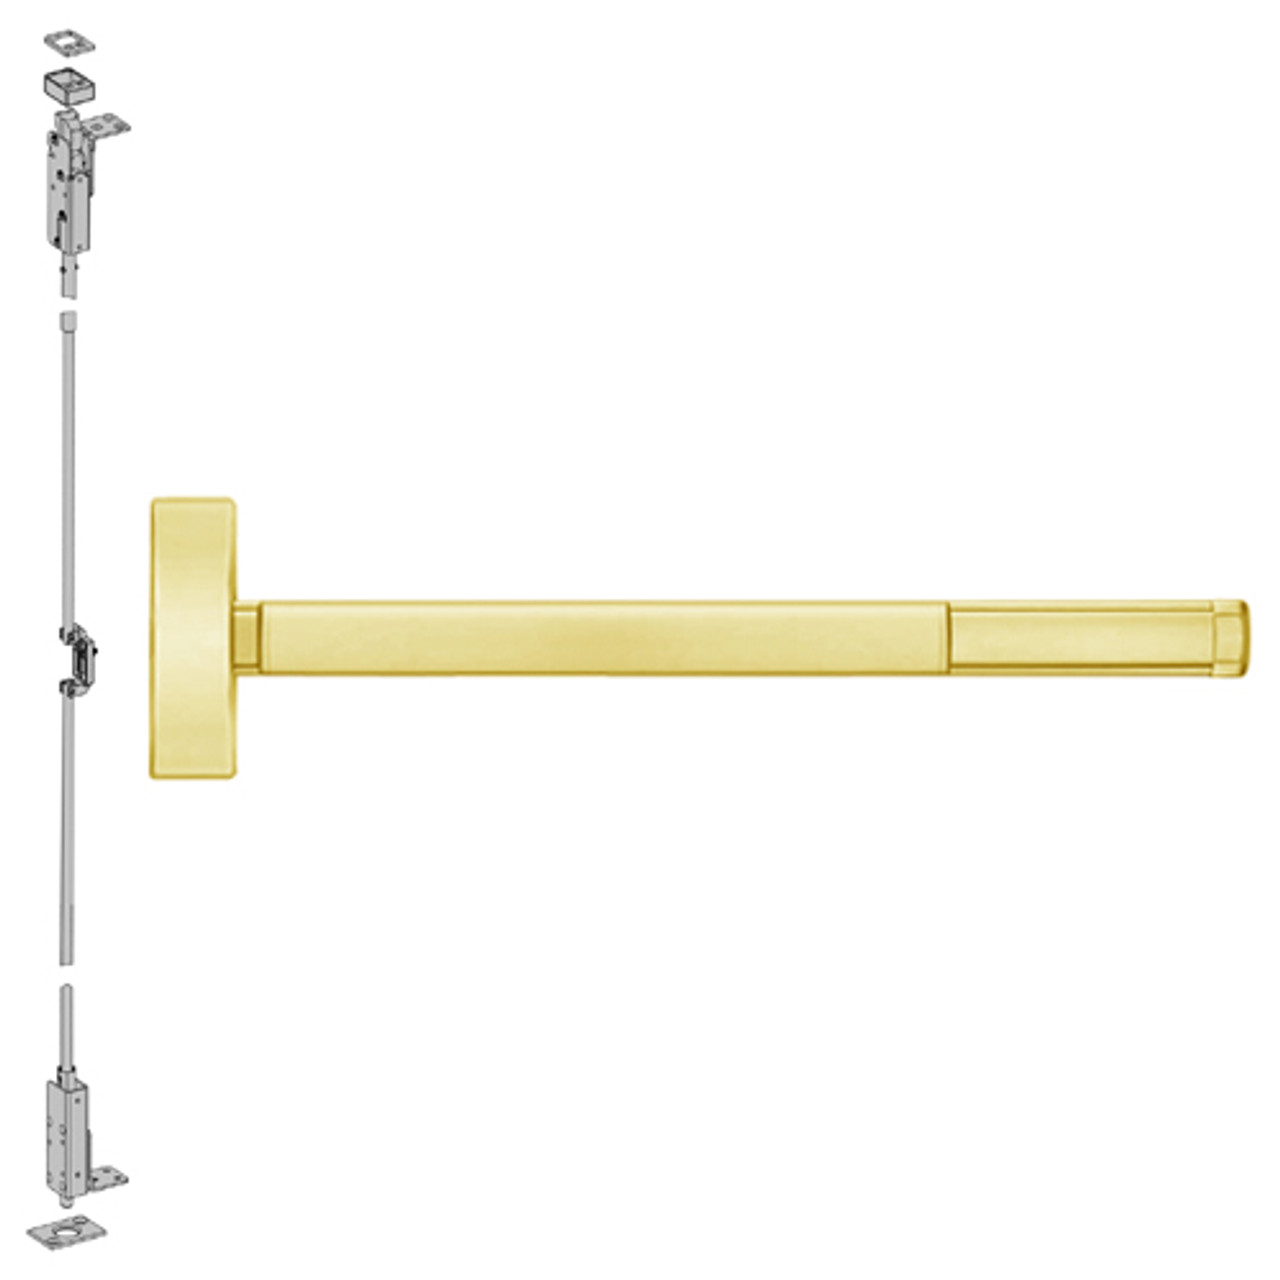 2702-605-36 PHI 2700 Series Non Fire Rated Wood Door Concealed Vertical Exit Device Prepped for Dummy Trim in Bright Brass Finish